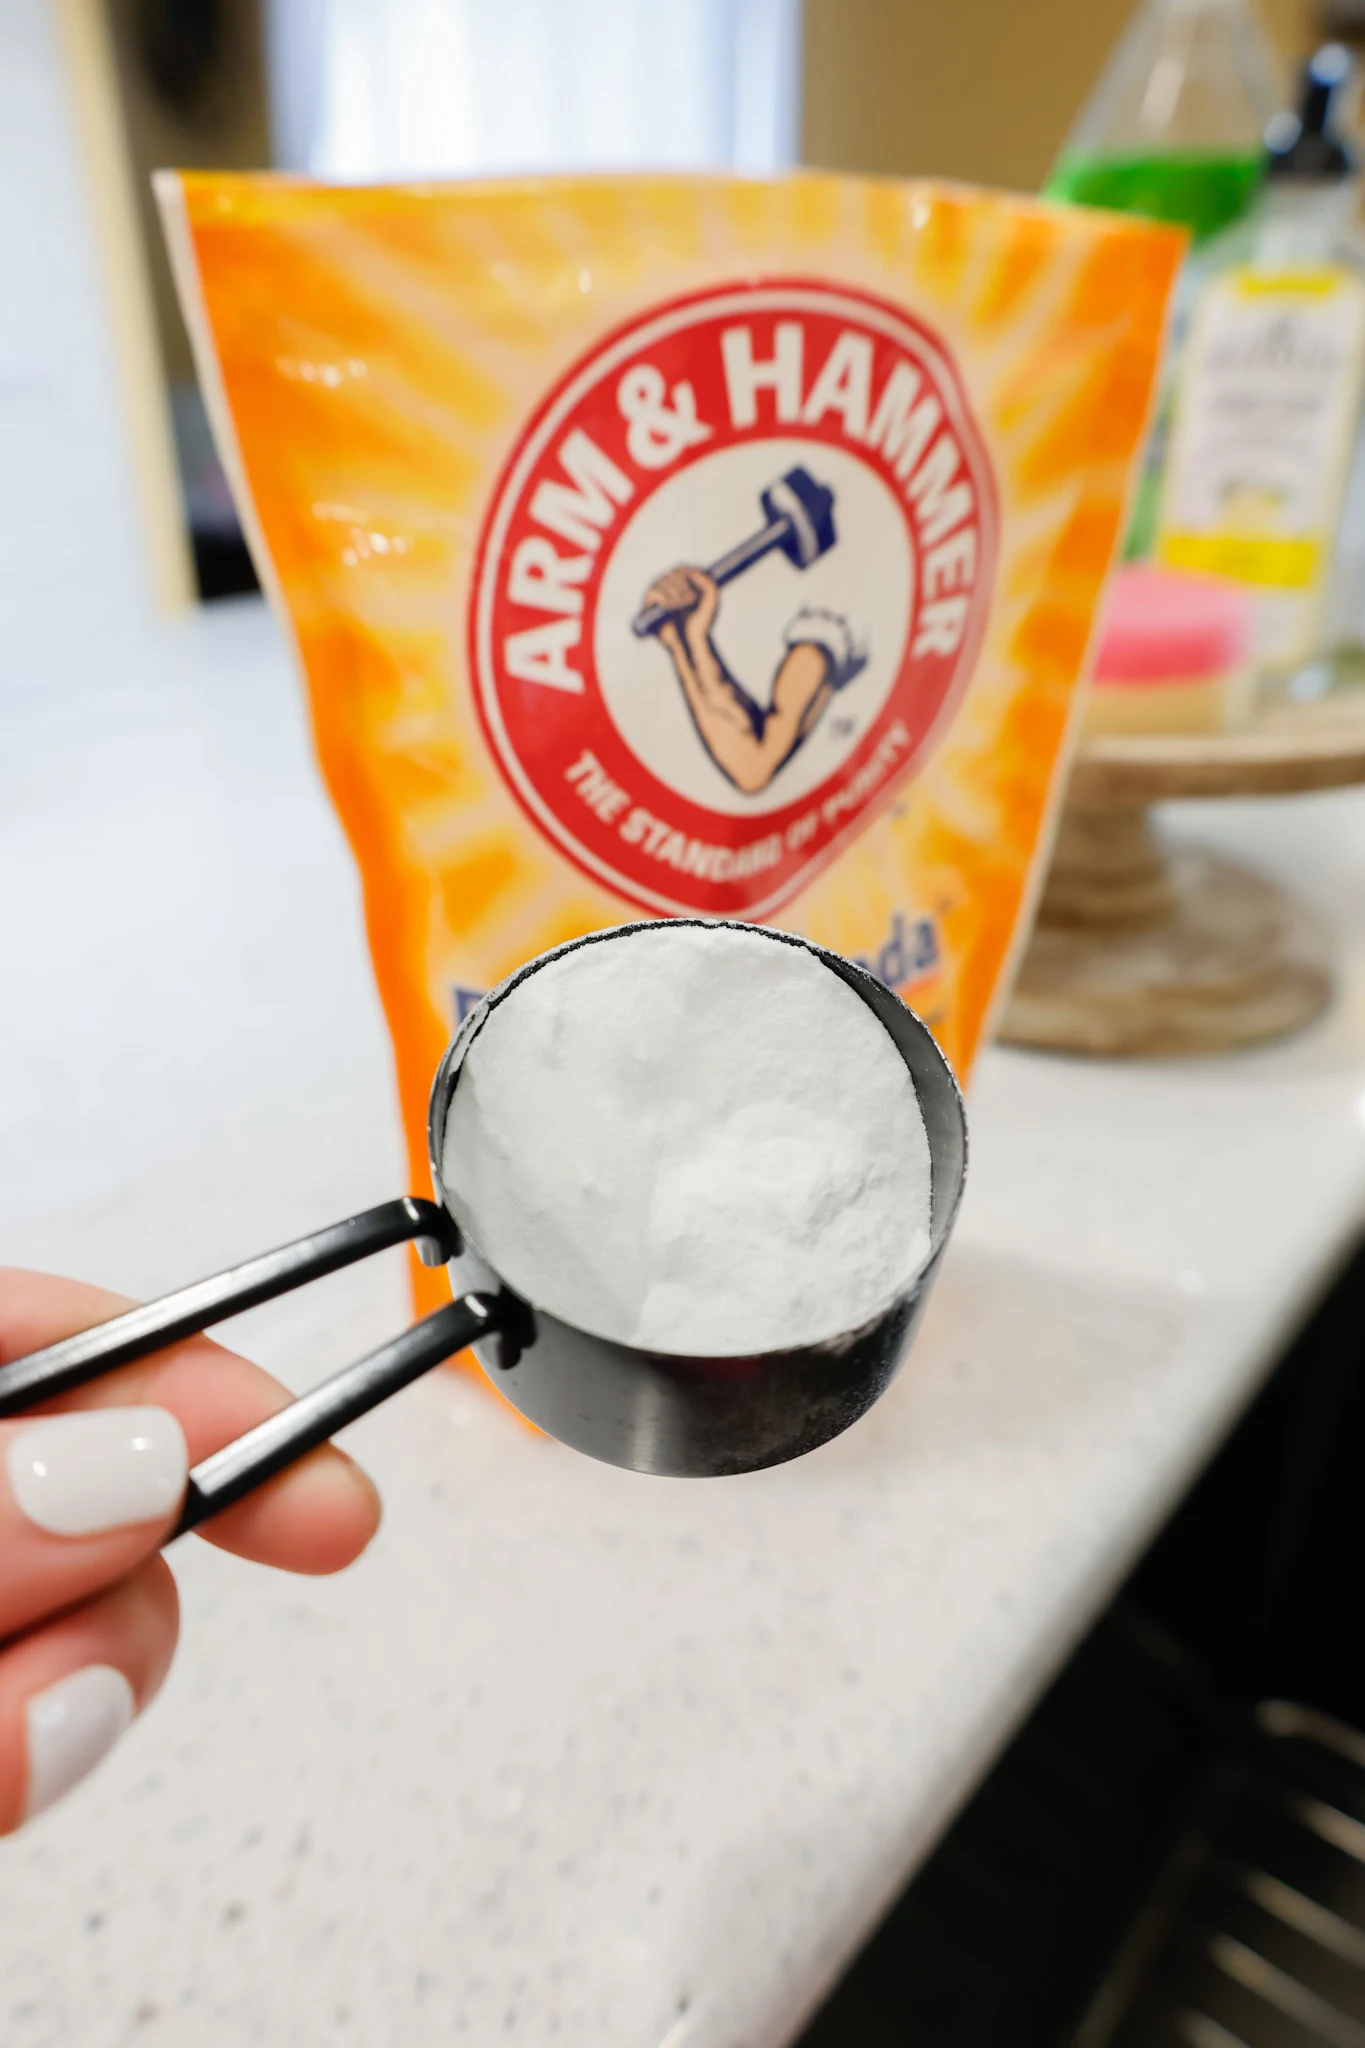 baking soda in a measuring cup in front of a baking soda bag